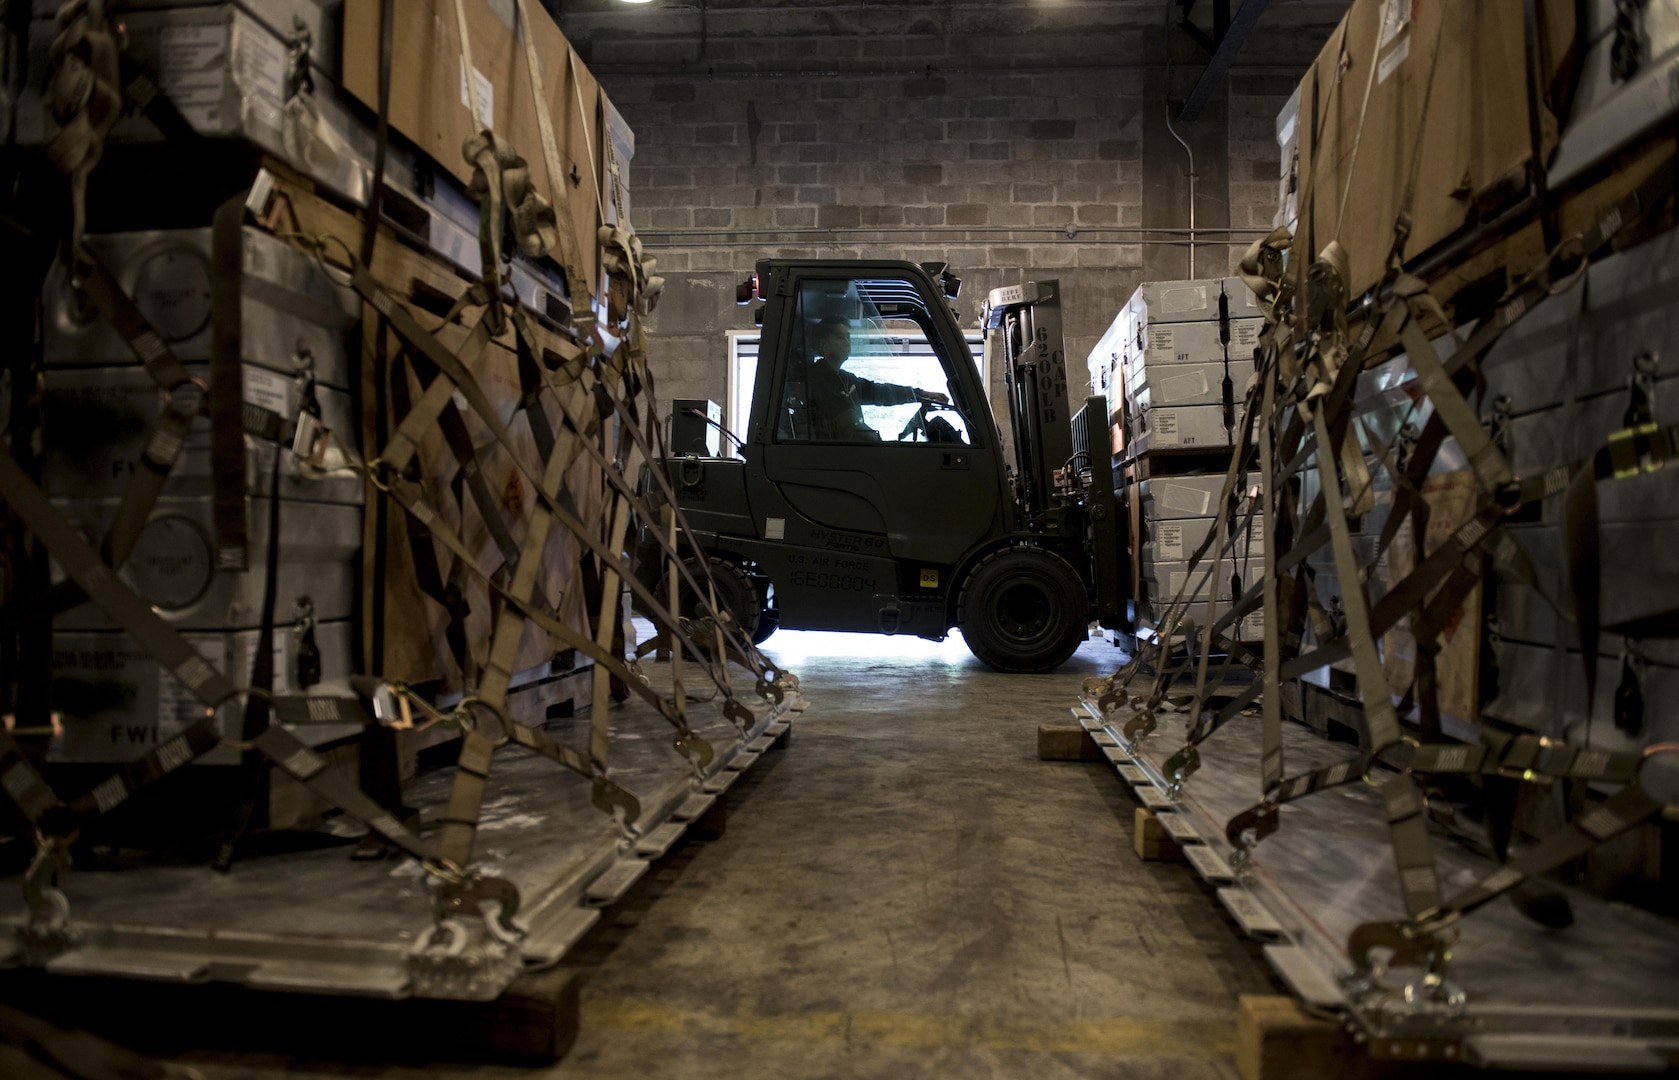 A forklift transports munitions during a Tactical Ammunition Rapid Response Package exercise Dec. 6, 2016, at Kadena Air Base, Japan. To pass the exercise, each completed pallet must receive proper inspection and information documentation by Airmen of the 18th Munitions Squadron, together with the 18th Logistics Readiness Squadron and 733rd Air Mobility Squadron. (U.S. Air Force photo by Senior Airman Omari Bernard/Released)